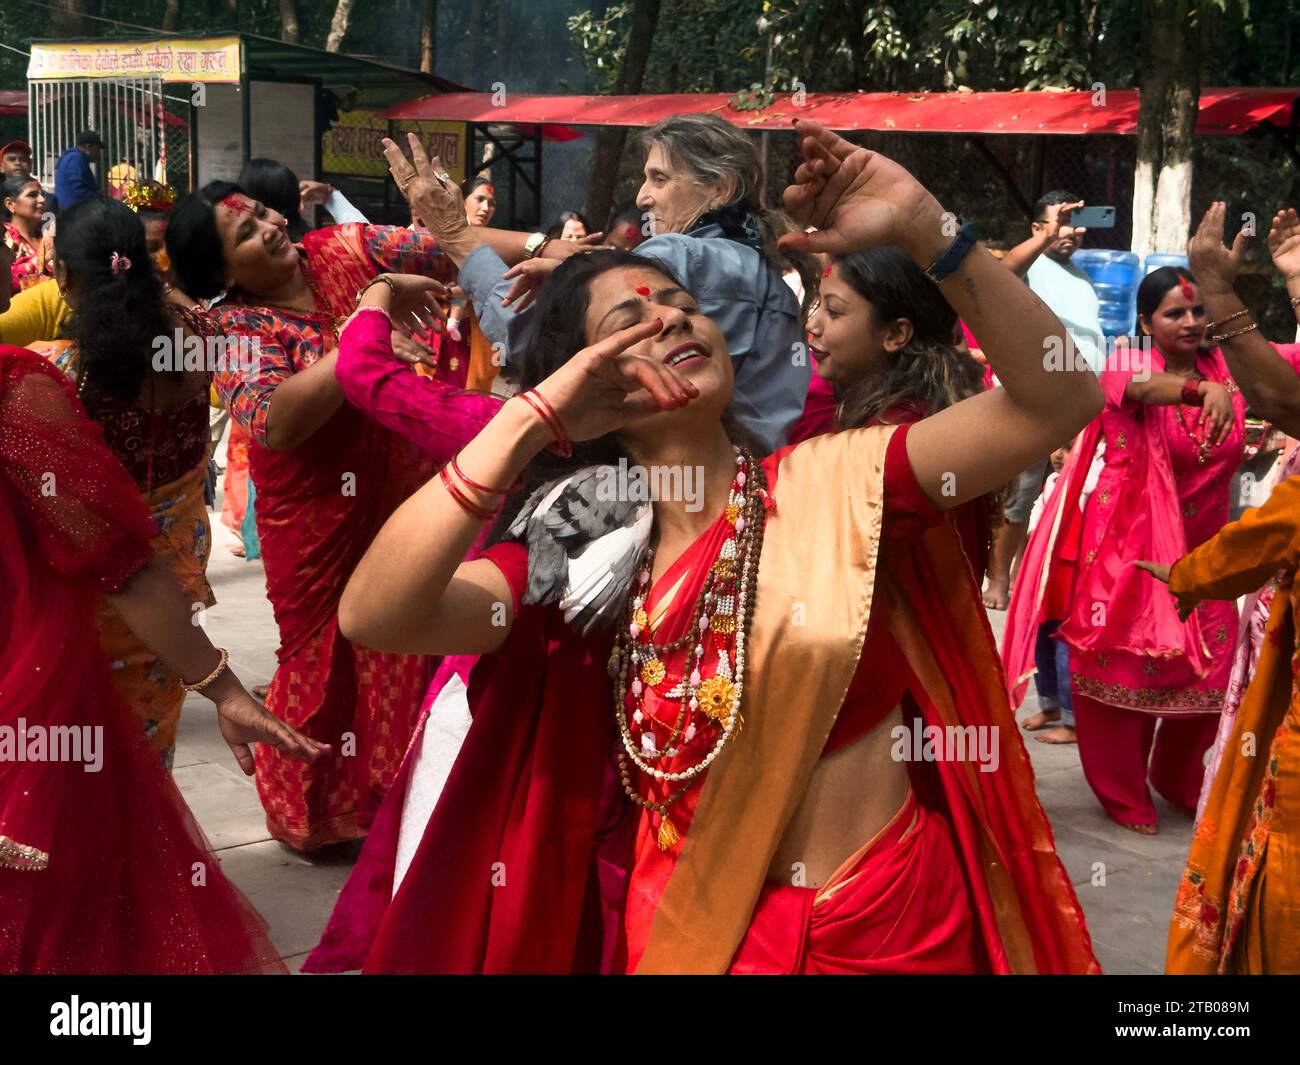 Devotional dancing at a Kali temple during a Hindiu celebration   on Desai near Ghandrung on route to the Kali Gandaki Gorge  - Mustang District, Nepa Stock Photo